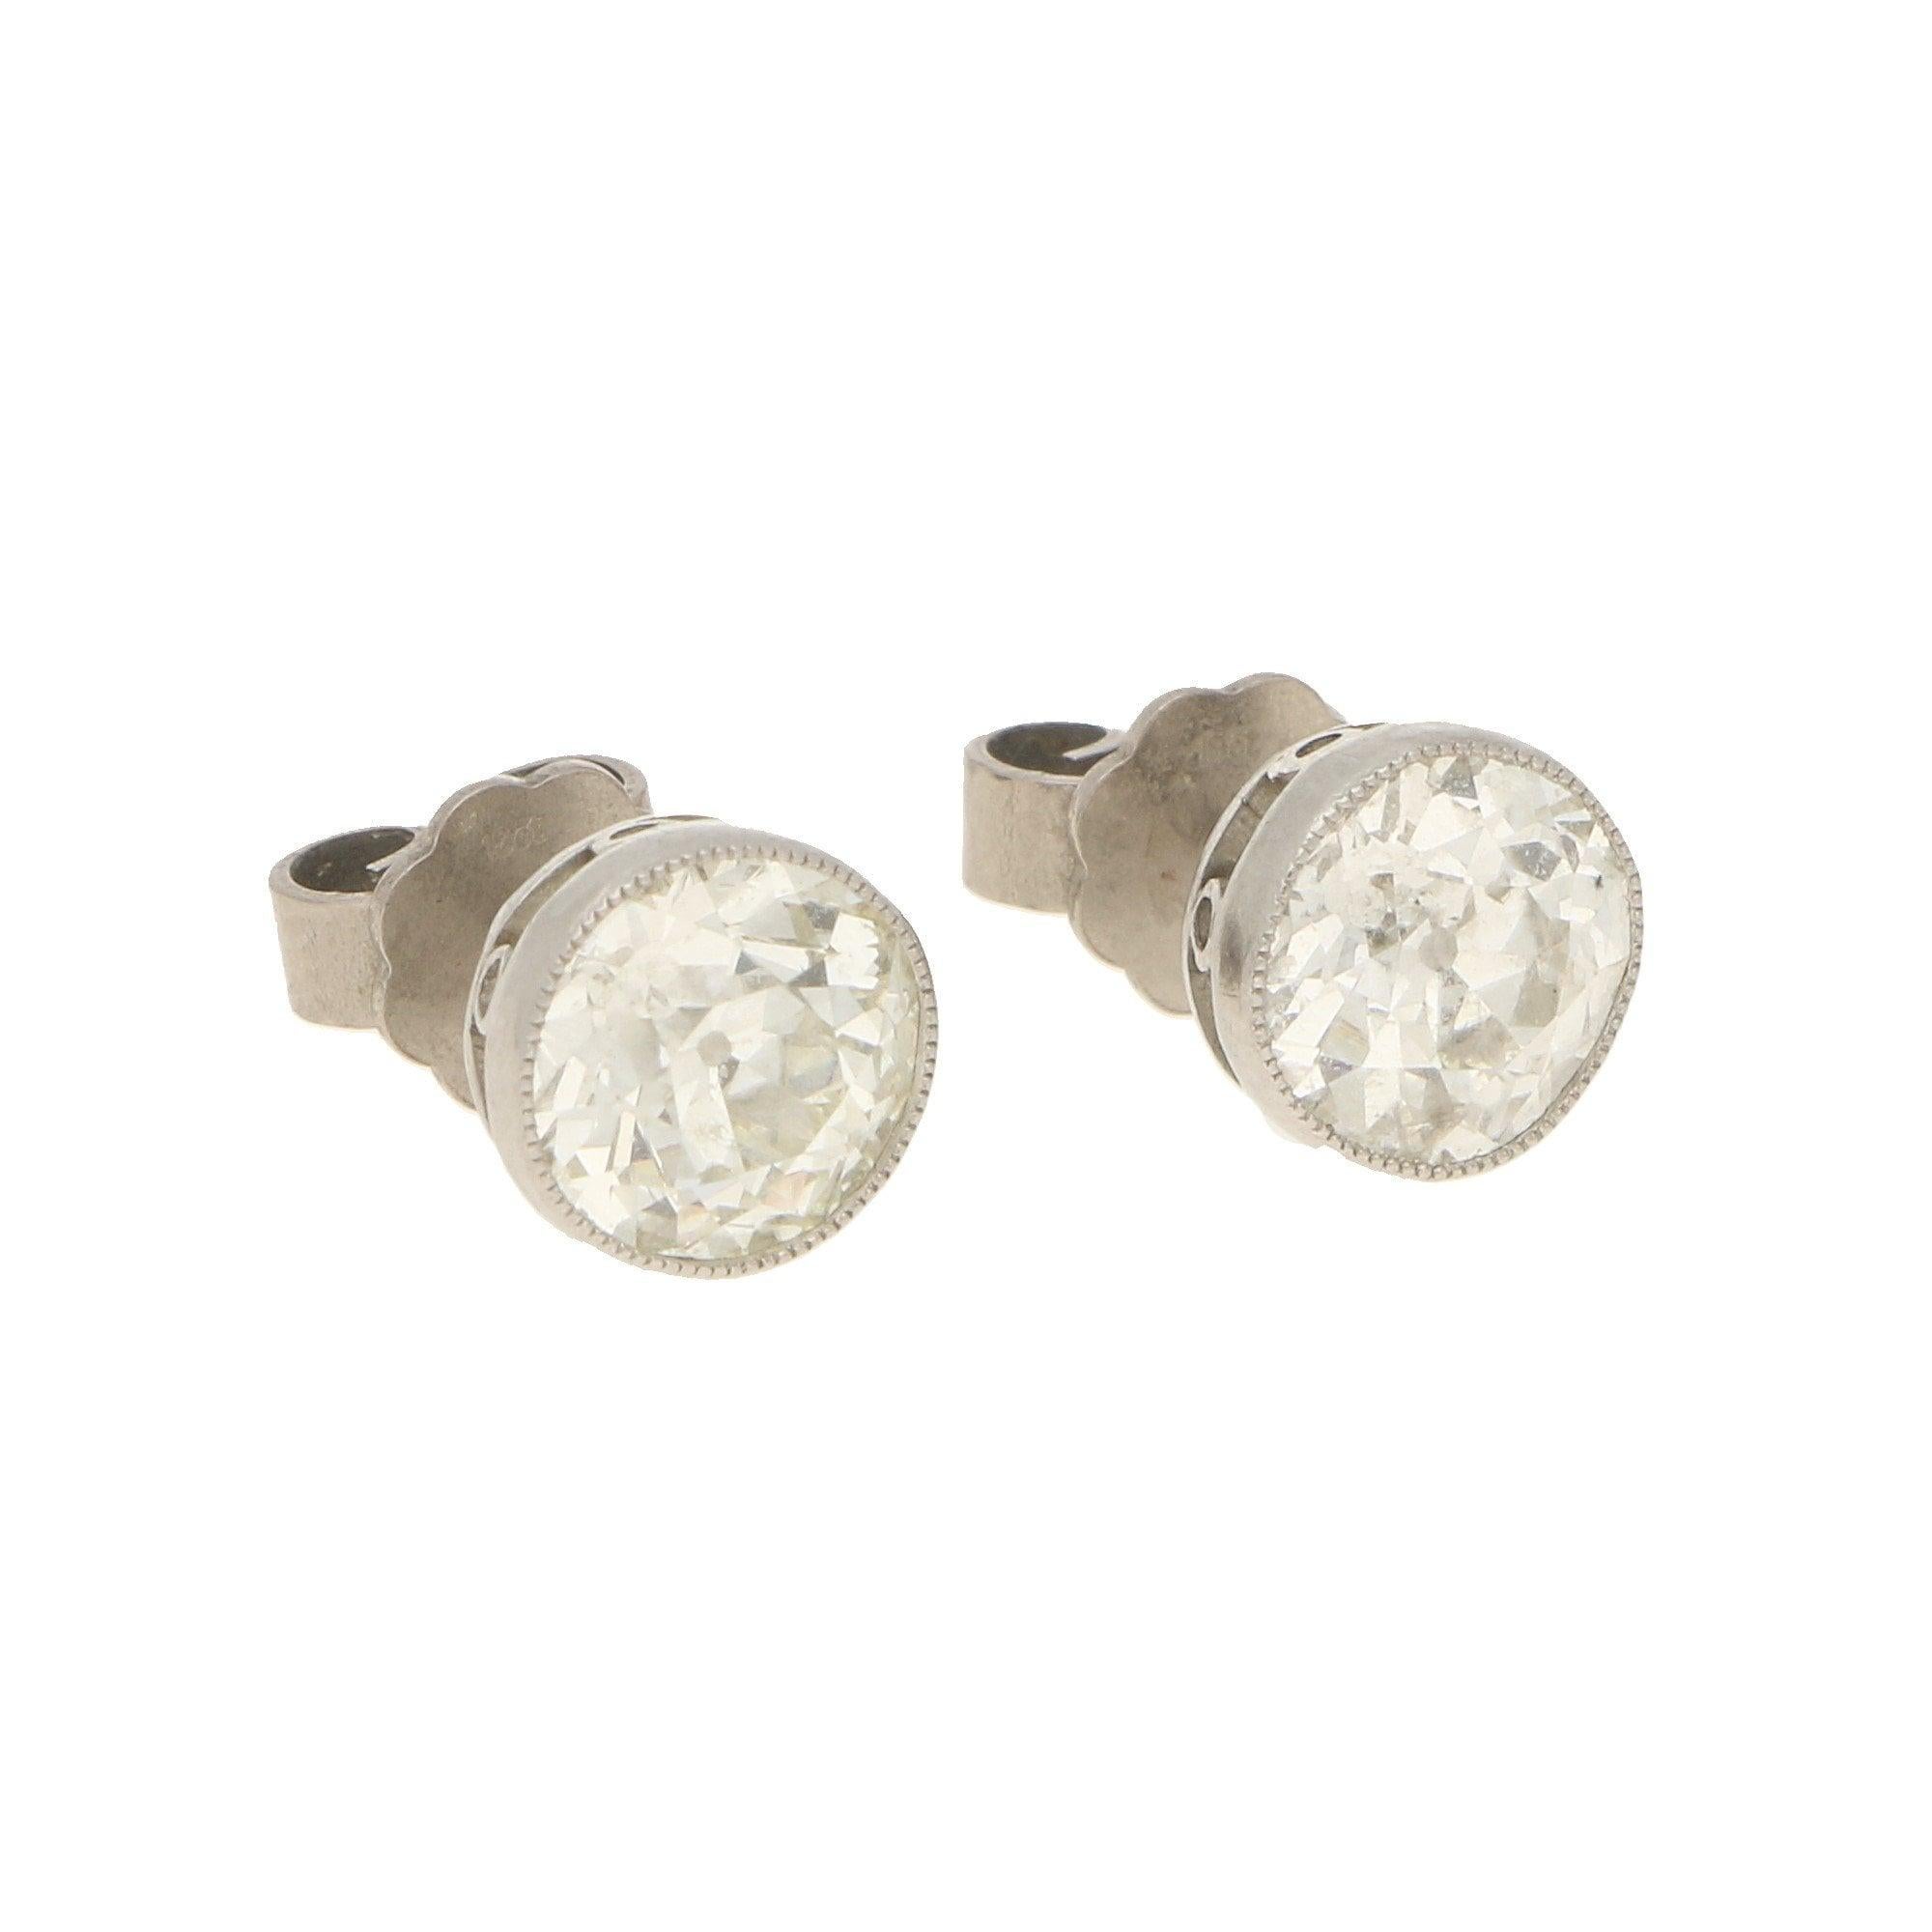 Diamonds approximately 2.50 carats in total, H/I colour, SI clarity.

A pair of Edwardian diamond stud earrings in platinum. Each earring features an Old Mine-cut diamond millegrain-set in an open-back platinum collet with an intricately pierced